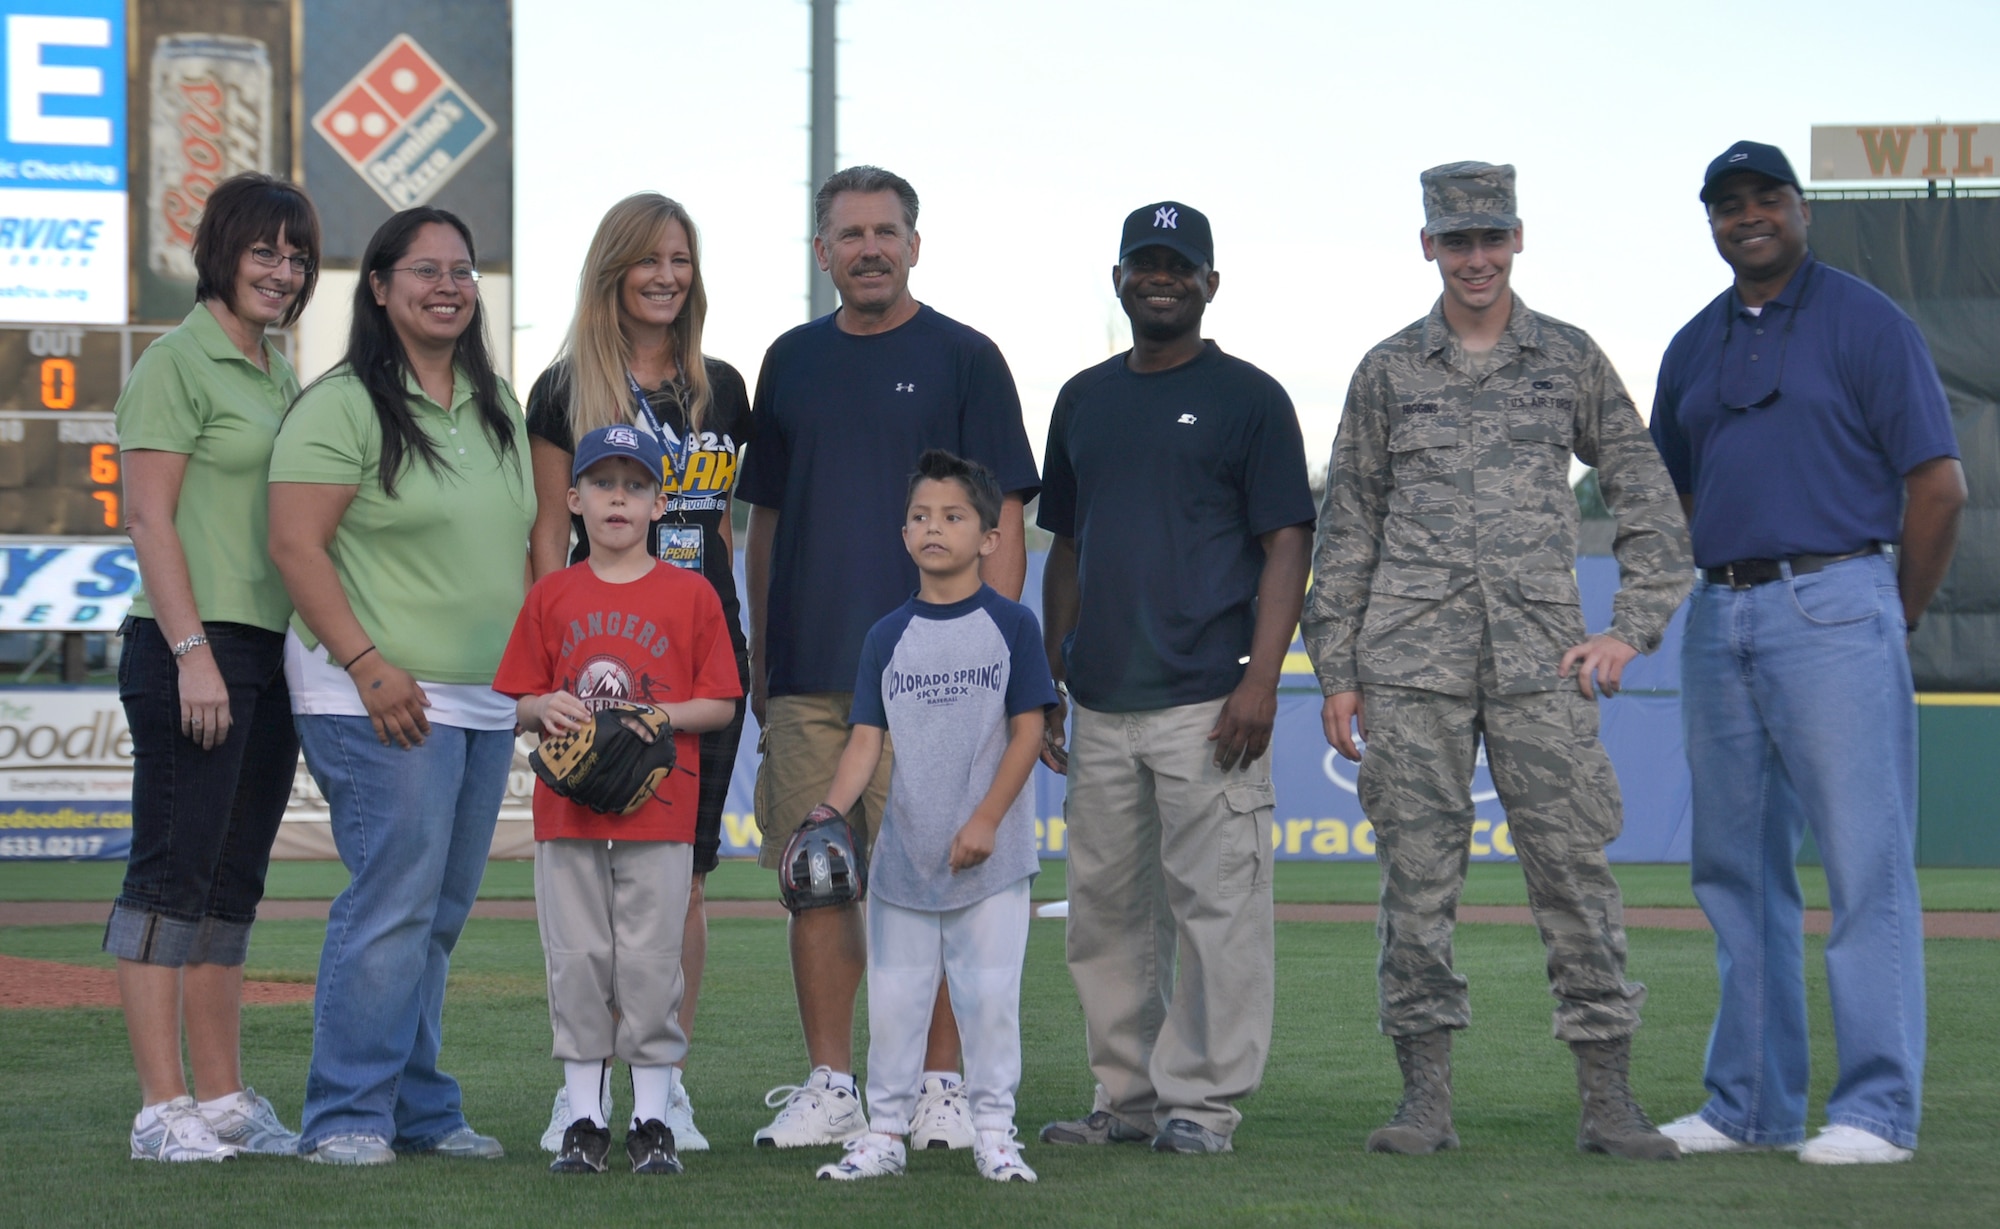 Airman 1st Class Tyler Higgins gets a group photo with other first pitch selectees July 10 at Security Service Field in Colorado Springs, Colo. Airman Higgins, a C-130 avionics technician apprentice with the 52nd Airlift Squadron, was given the opportunity to throw out a first pitch at the Colorado Springs Sky Sox game because of his recent arrival to the squadron. The 52nd AS, an Active Duty C-130 organization, is associated with the Air Force Reserve's 302nd Airlift Wing. Both organizations are based at nearby Peterson Air Force Base. (U.S. Air Force photo/Staff Sgt. Stephen J. Collier)